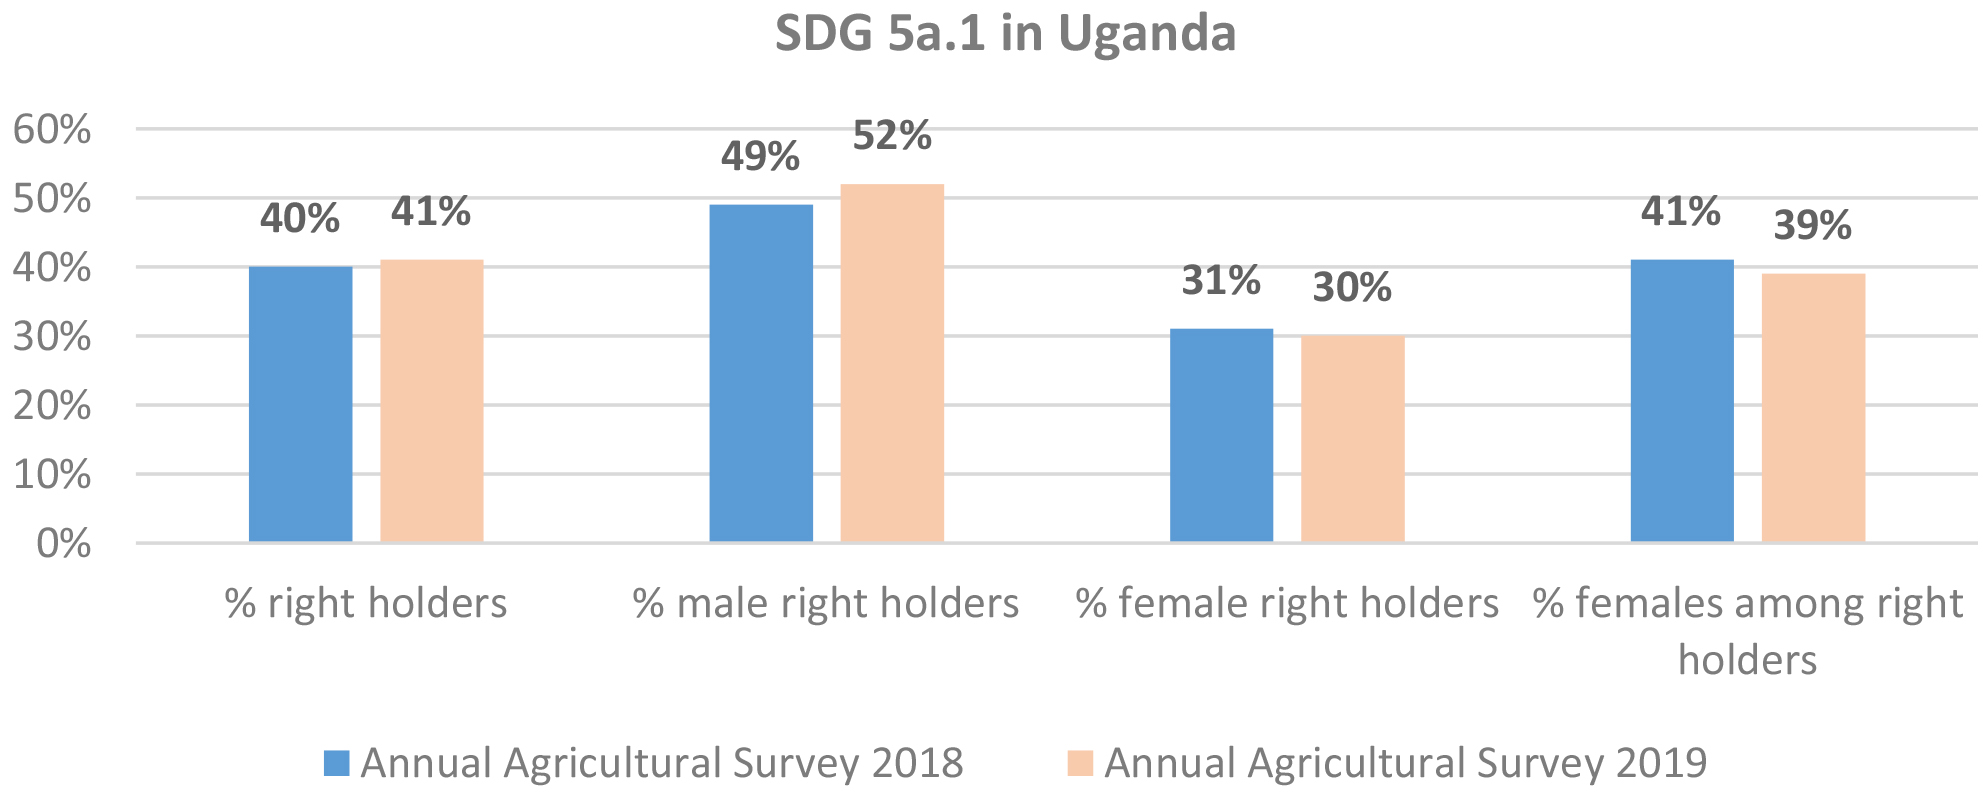 SDG 5.a.1 in Uganda. Estimates derived from the Uganda Annual Agricultural Survey 2018 and 2019.